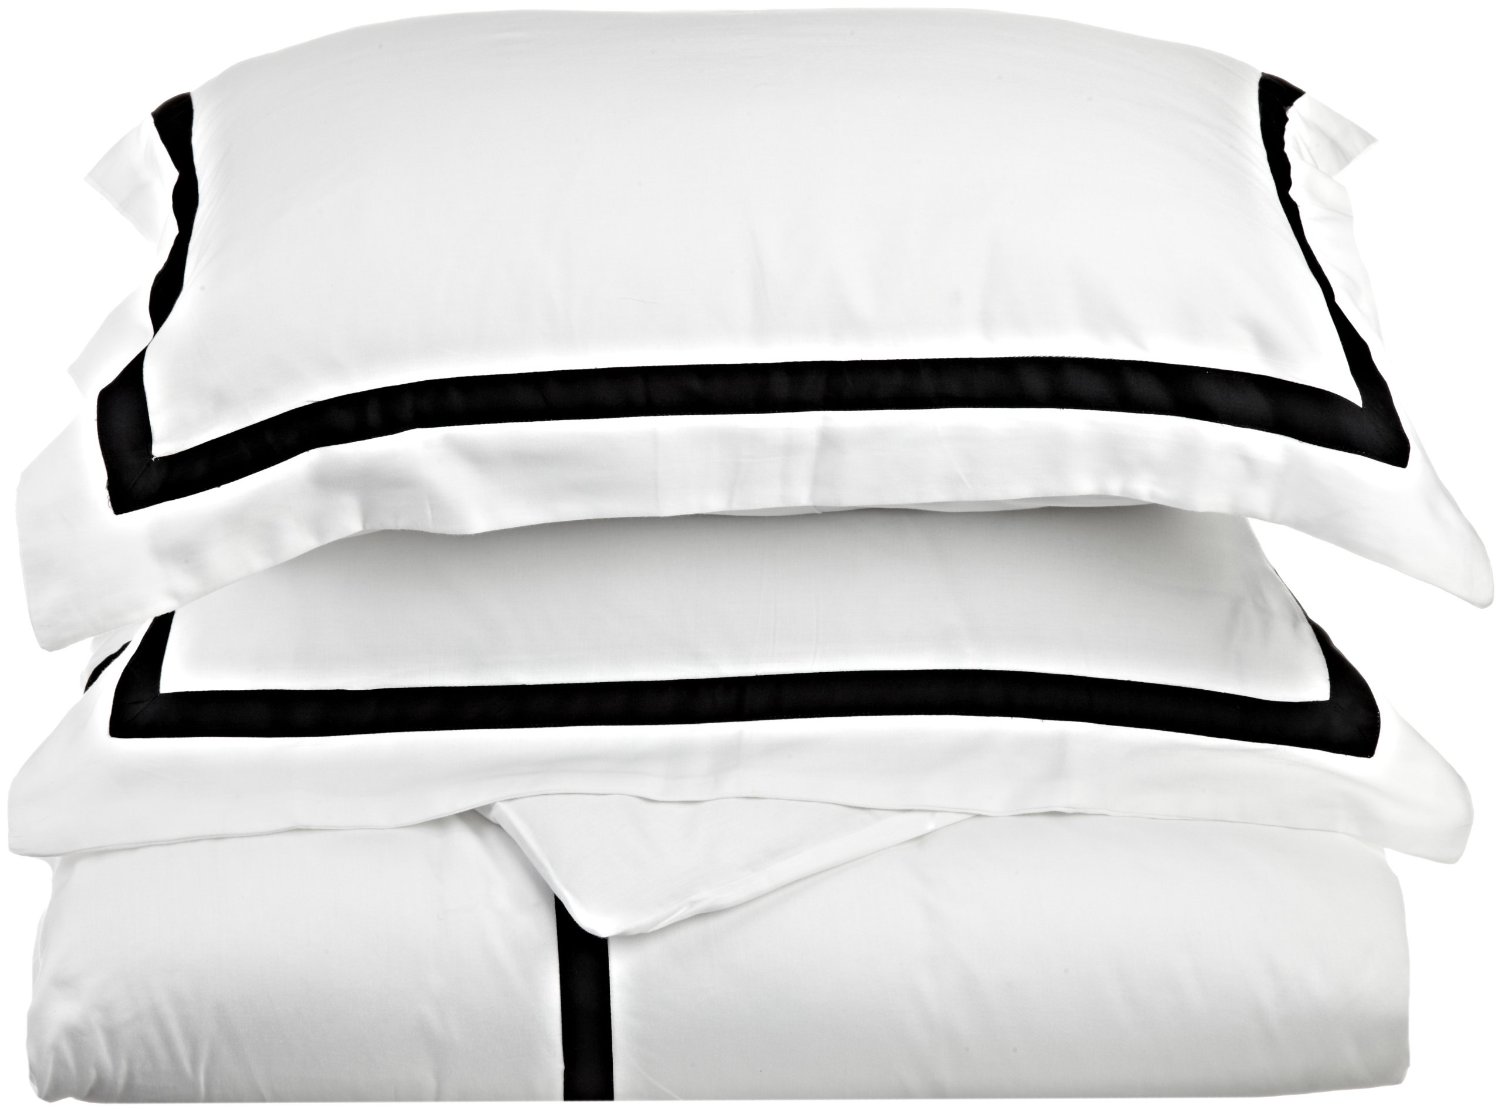 GoLinens Luxury 300 Thread Count 100% Cotton Hotel Collection Duvet Cover Sheet Set - Solid